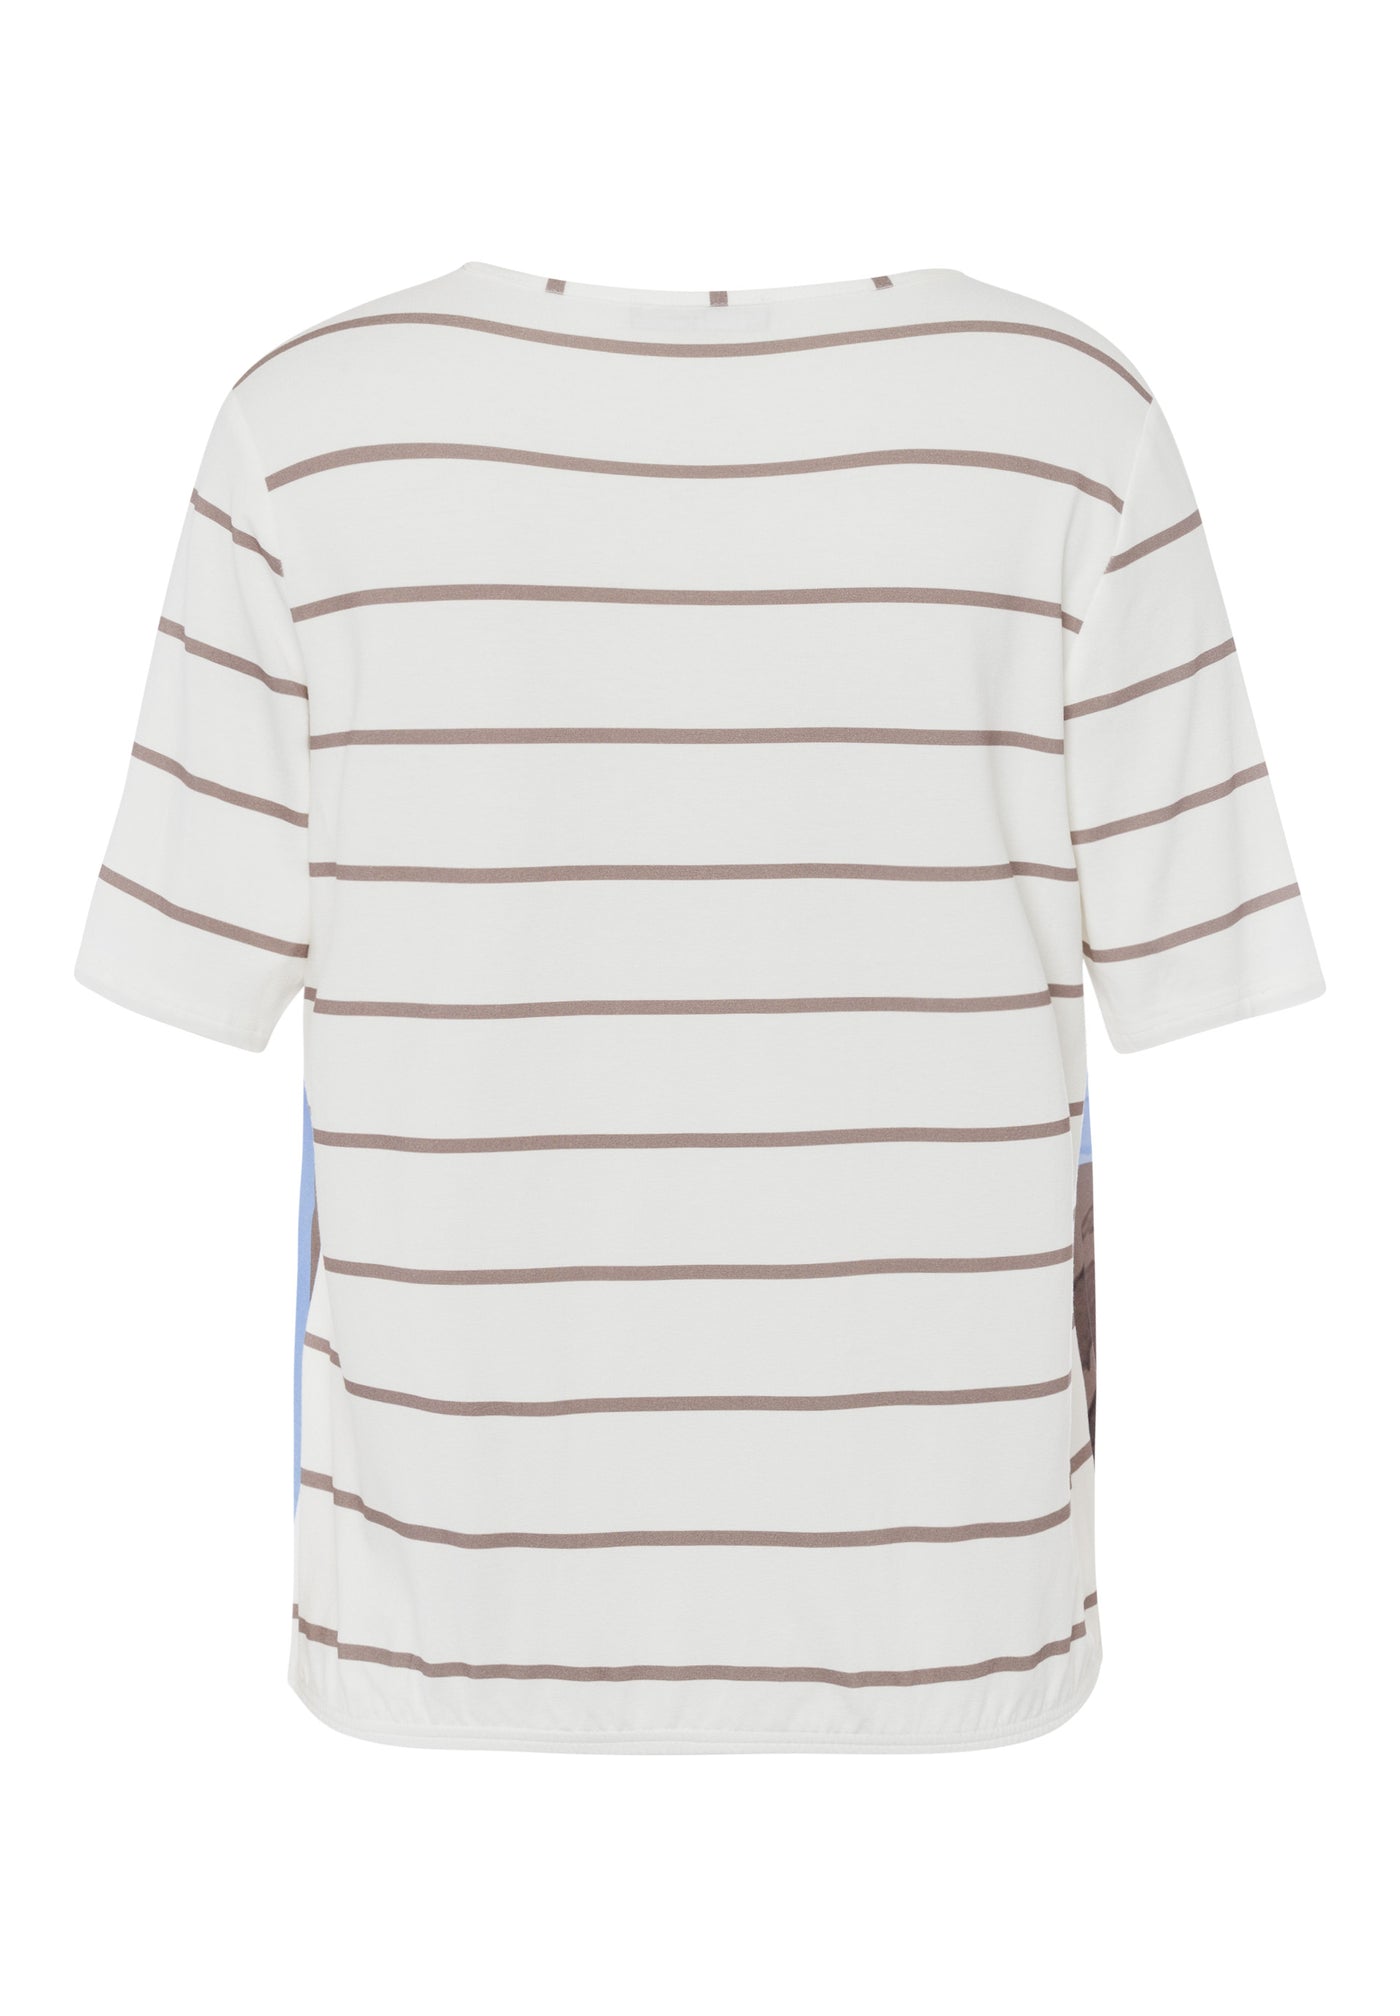 Cream Round Neck Top With Stripped Short Sleeves Blue & Brown Pattern & Elasicated Waist Detailing